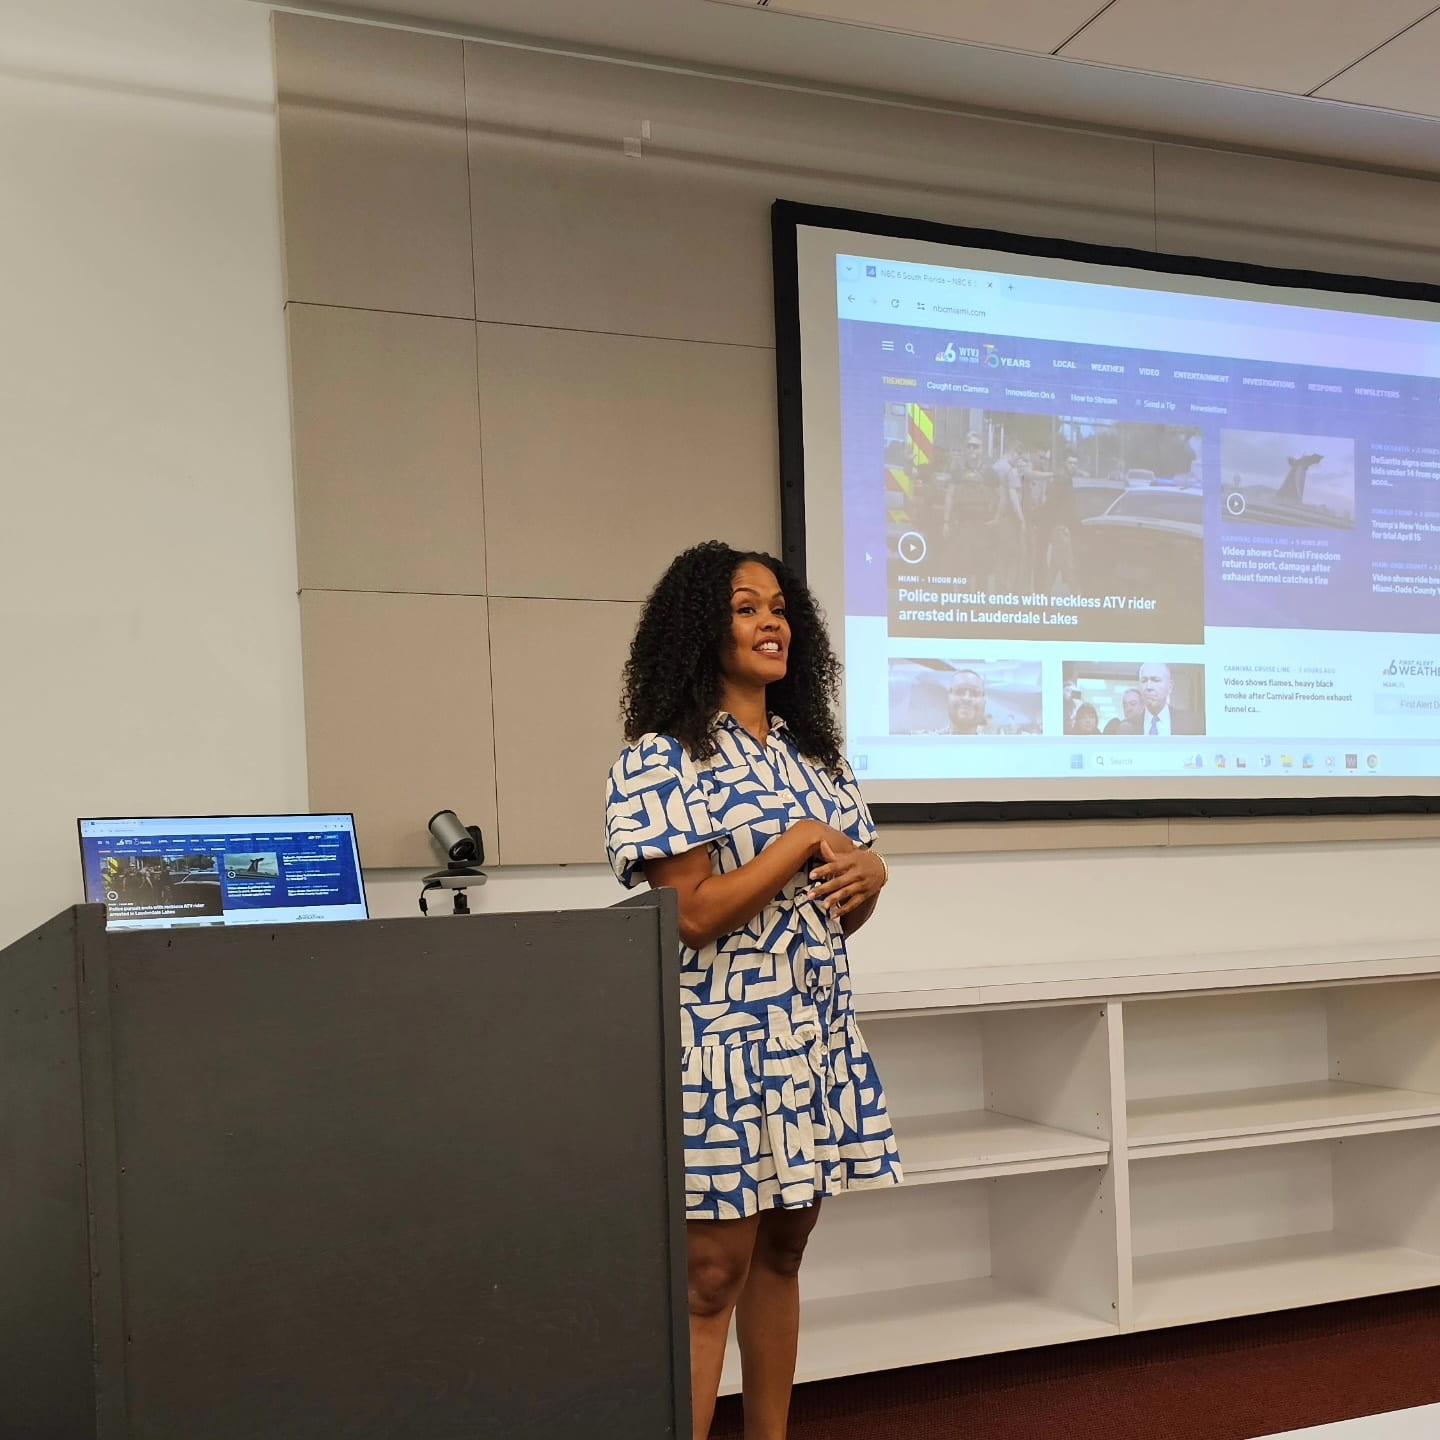 PHOTO BY DANNA BERTELJohanna Torres, NSU alumna and reporter for NBC 6 South Florida Today, discusses her experience in the news industry with communication practicum students.